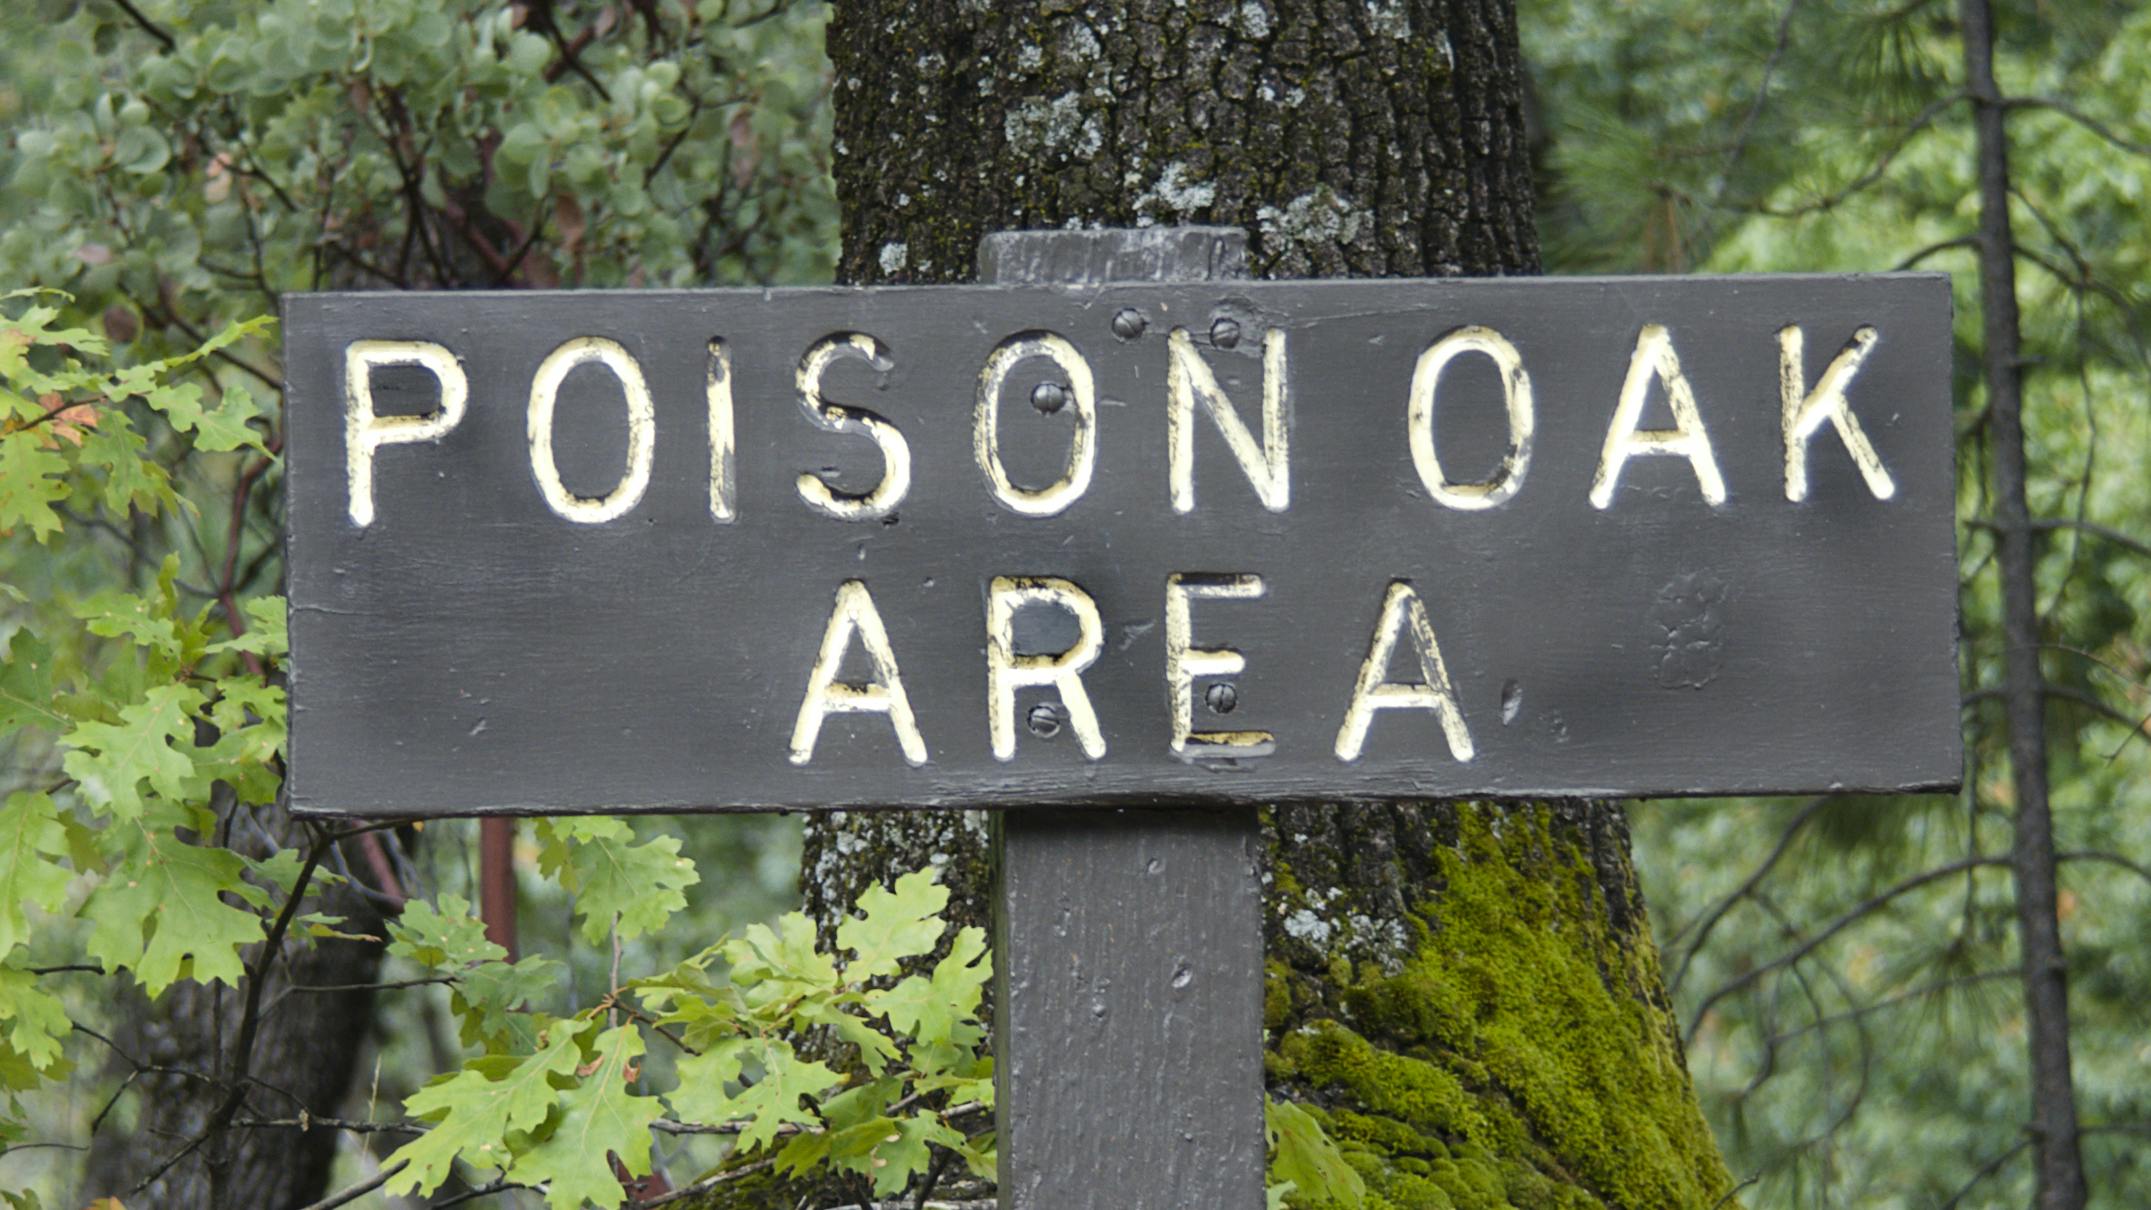 A sign that reads "Poison Oak Area".